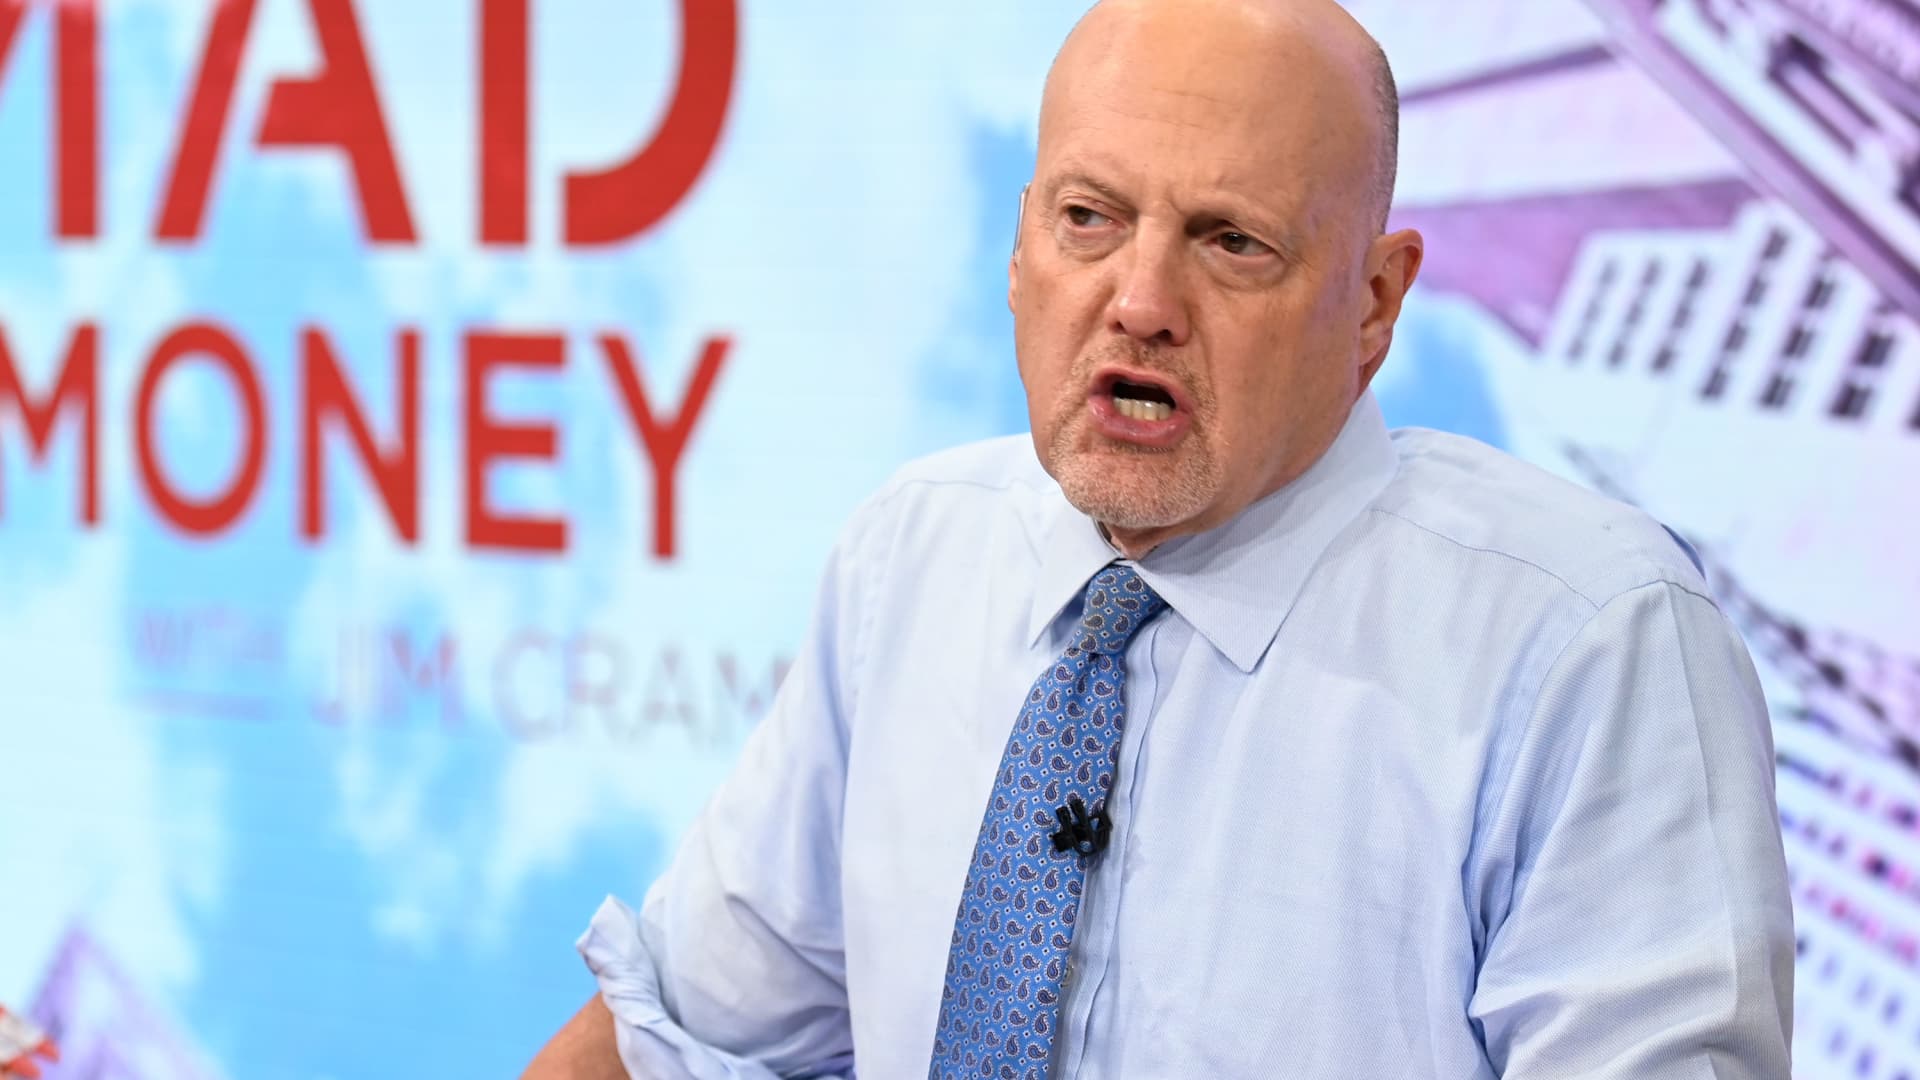 Jim Cramer says recent moves in Apple, Chipotle and Eli Lilly shares don't make sense